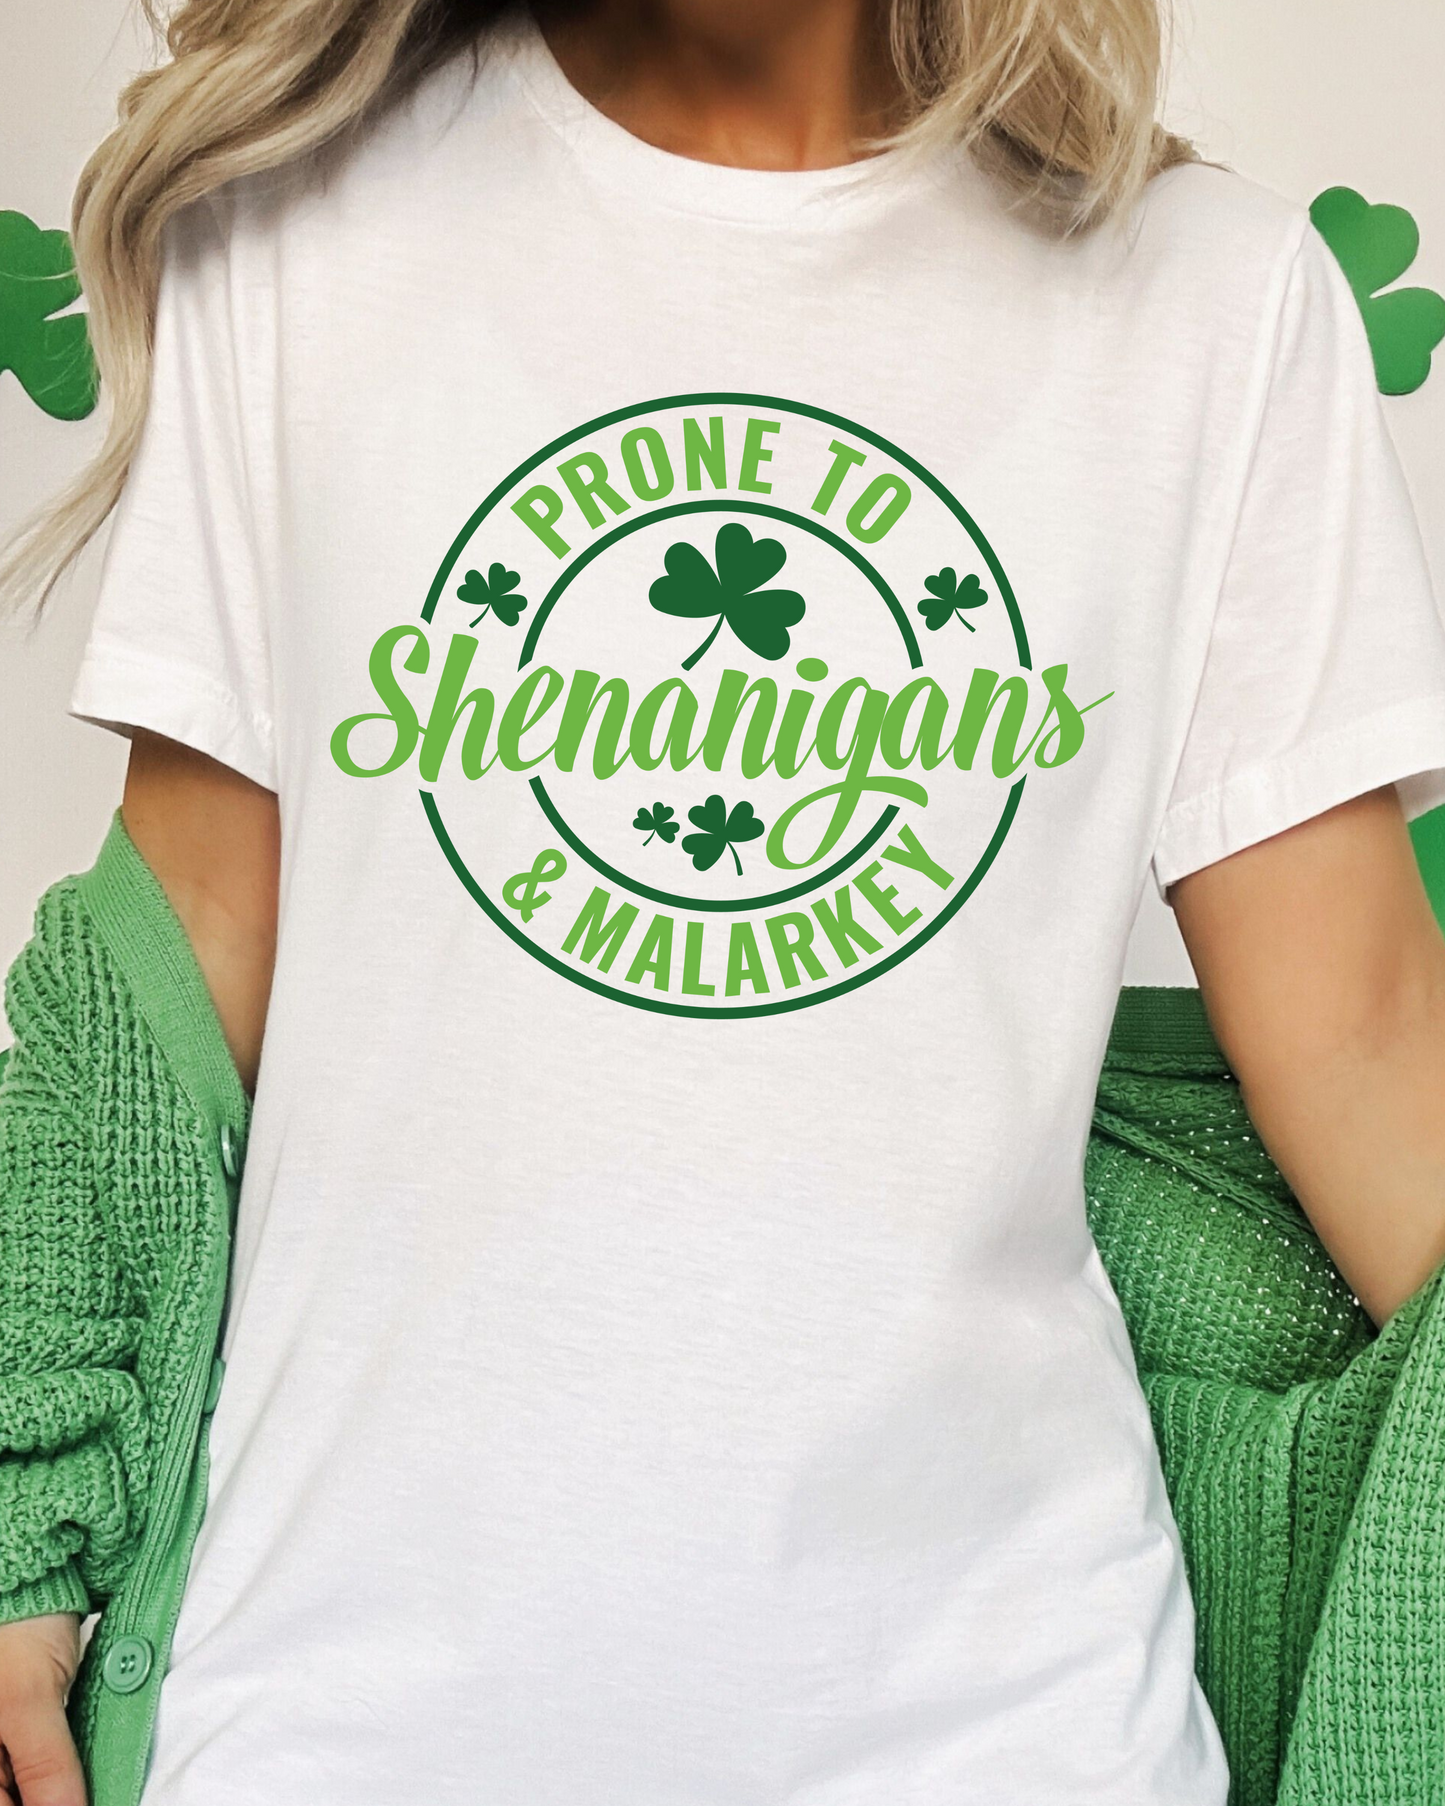 PRONE TO SHENANIGANS TEE (BELLA CANVAS) - 3 Colors